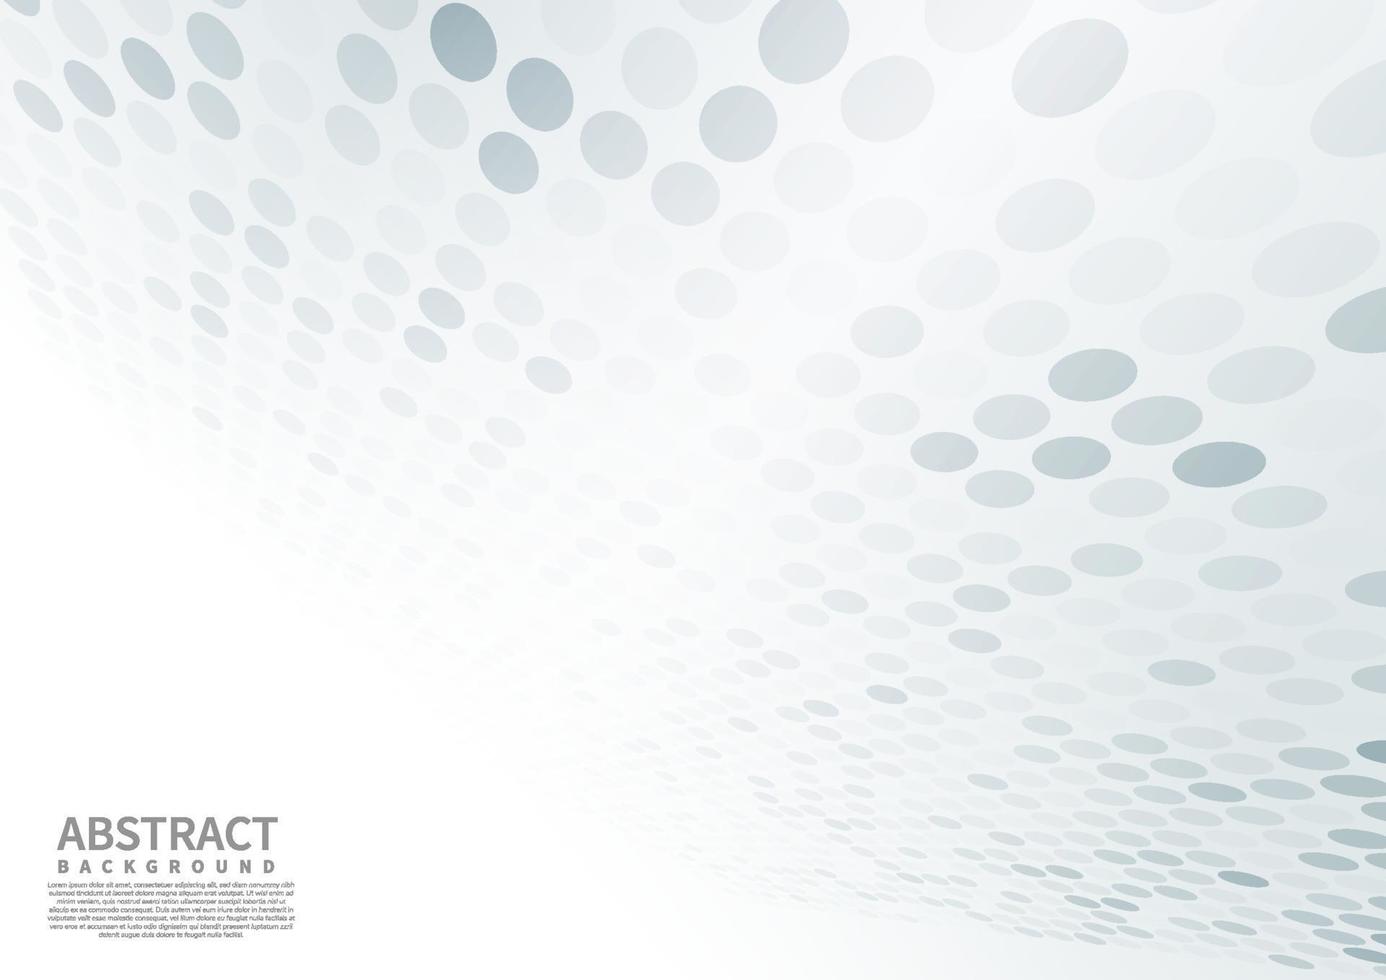 Abstract geometric dot pattern background with white shapes perspective can be used in cover design vector